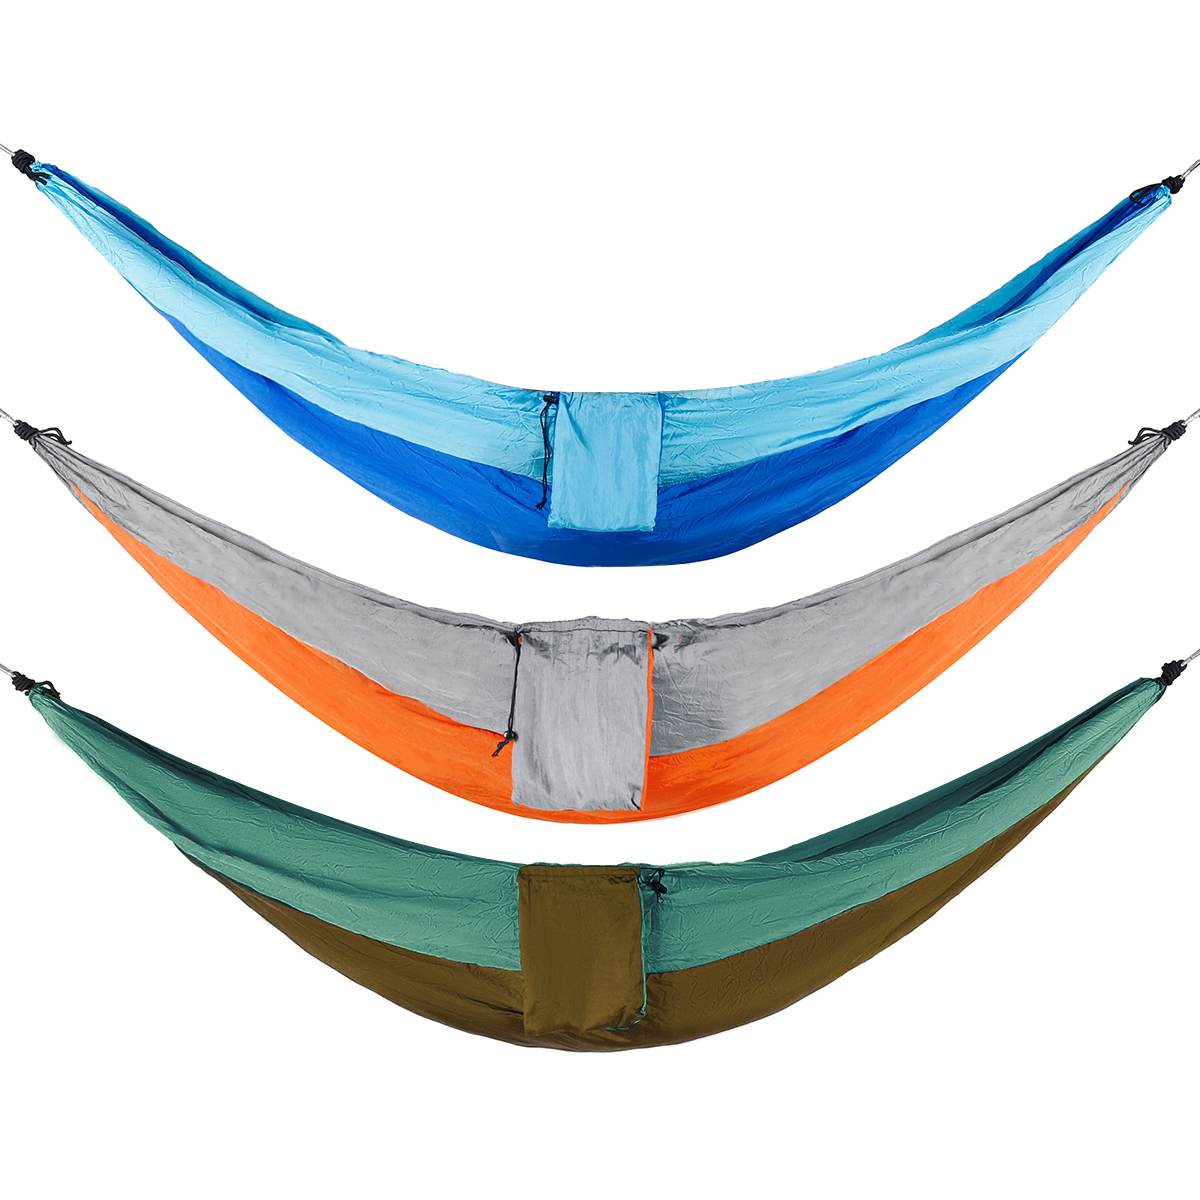 IPReereg-Double-Person-Hammock-Nylon-Swing-Hanging-Bed-Outdoor-Camping-Travel-Max-Load-300kg-1742182-5